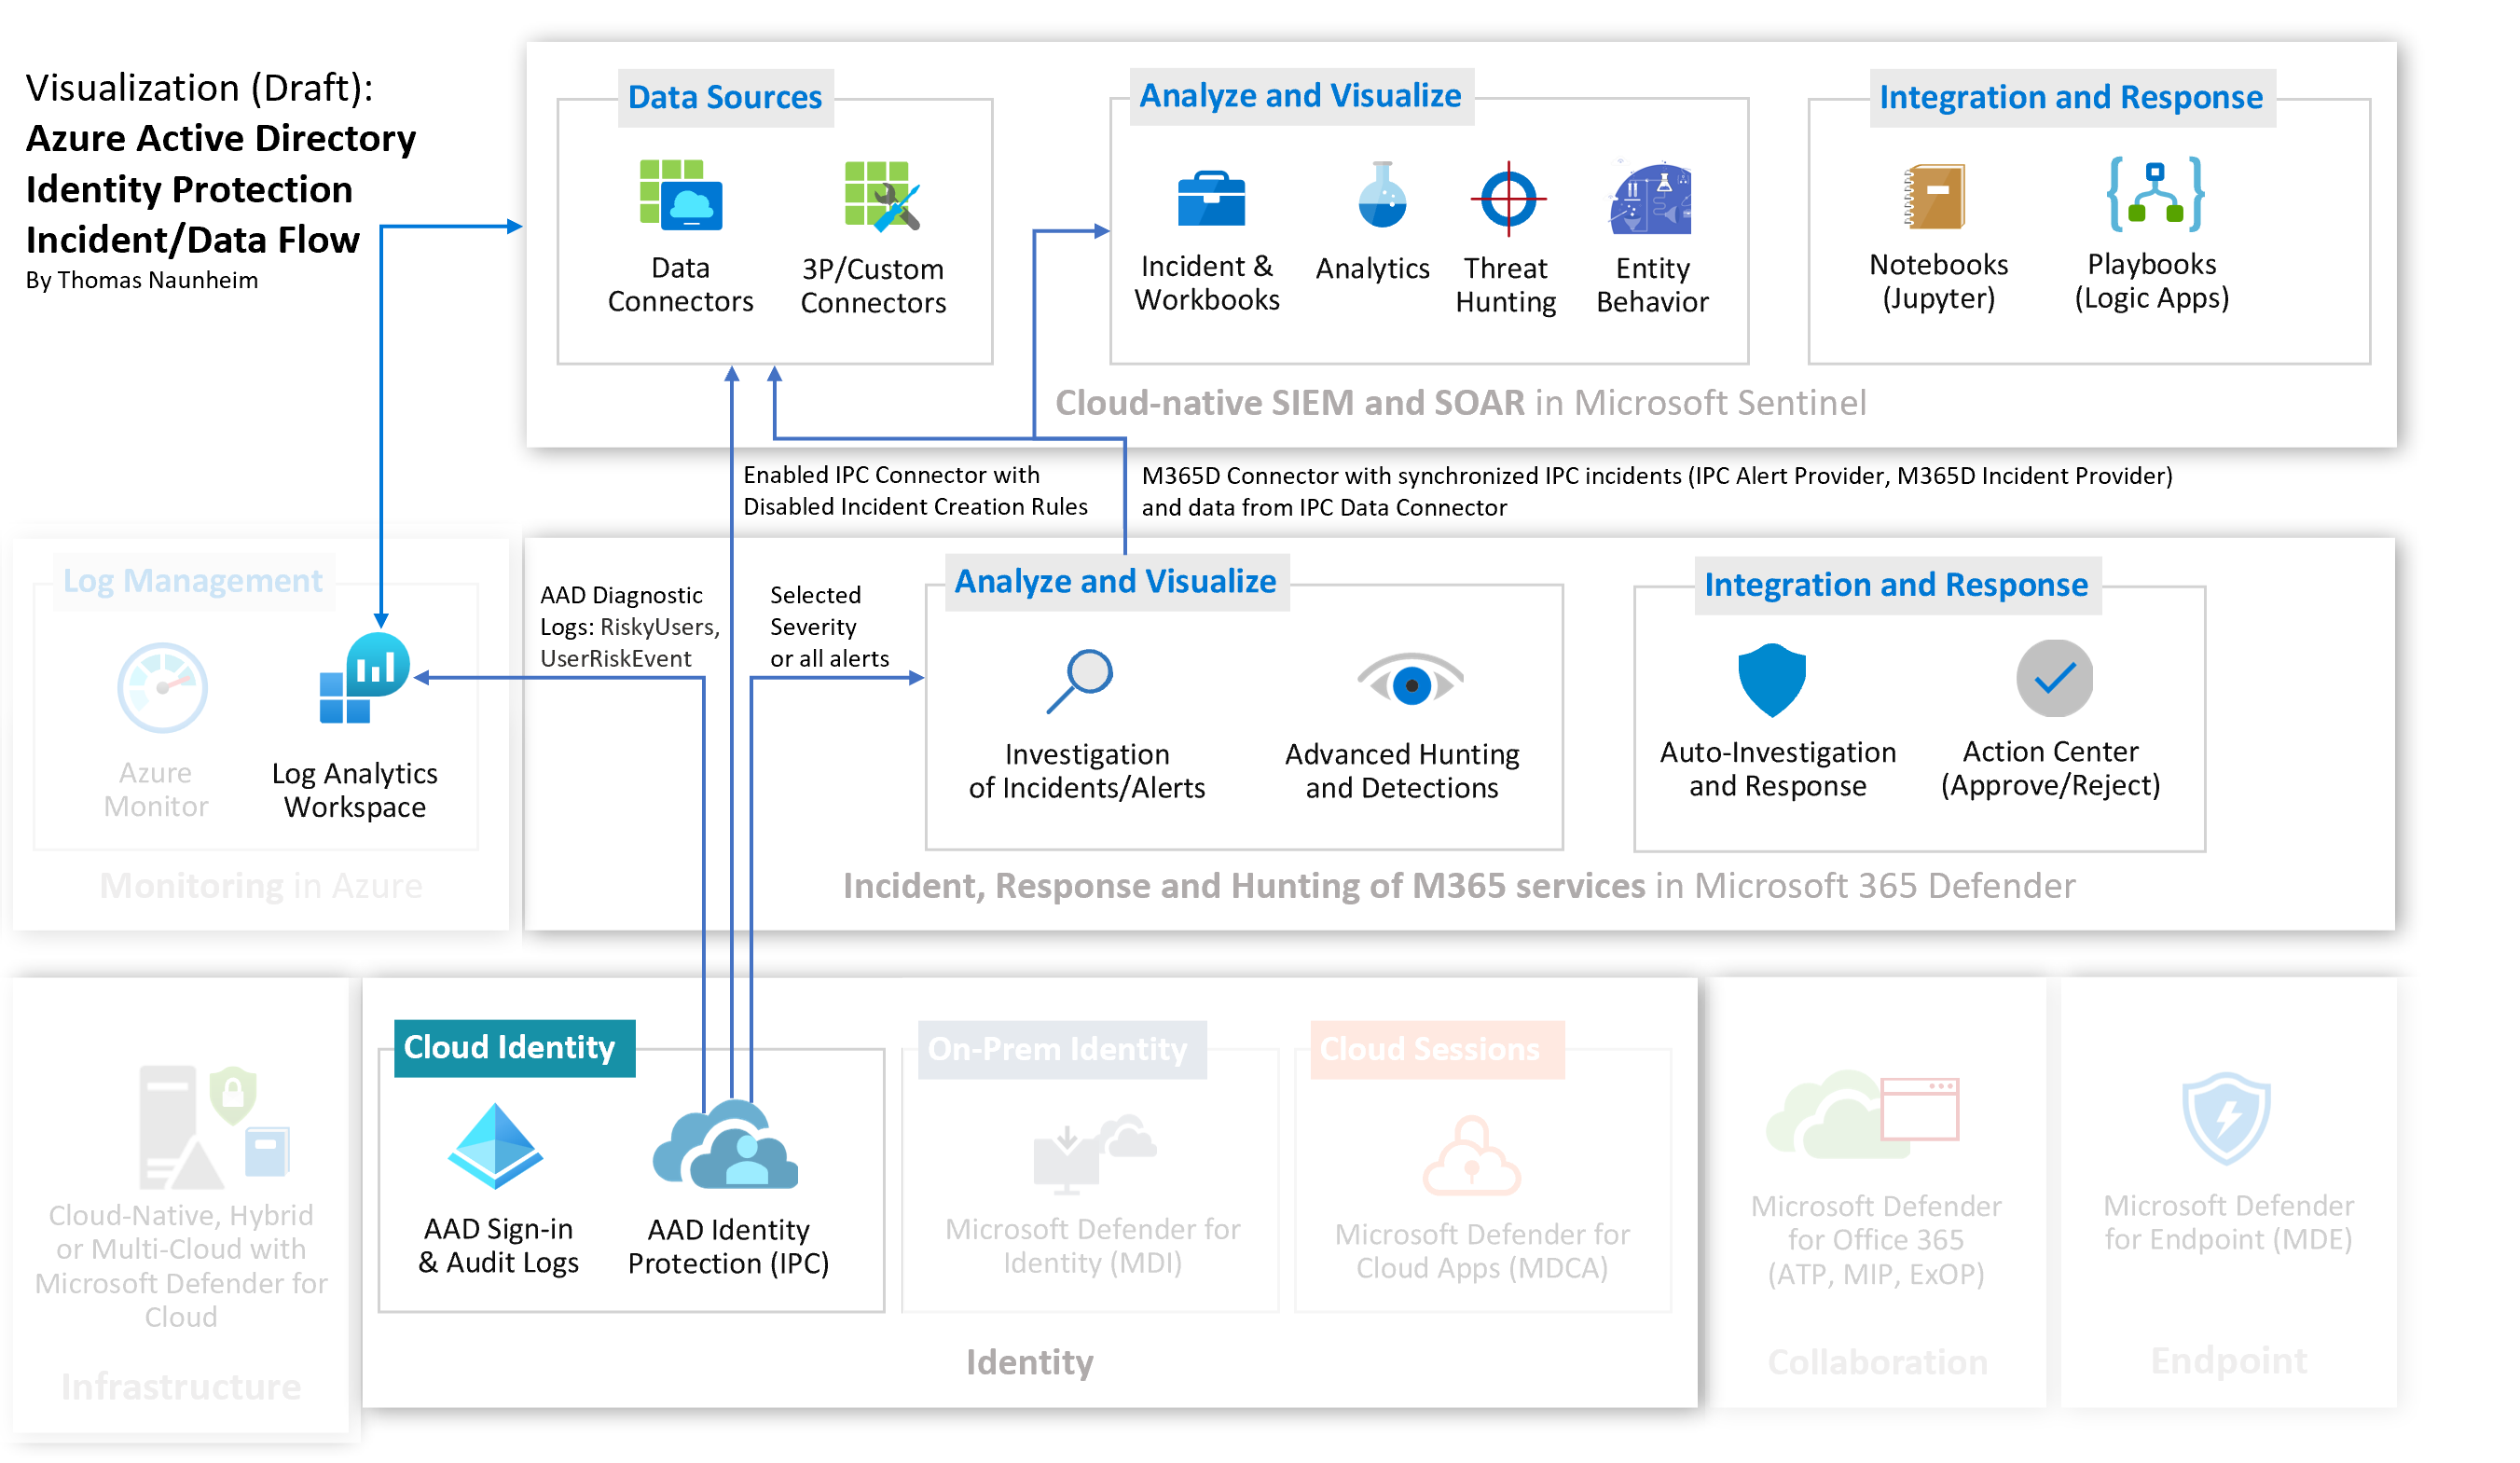 Azure AD Idenitty Protection Incident and Data Flow